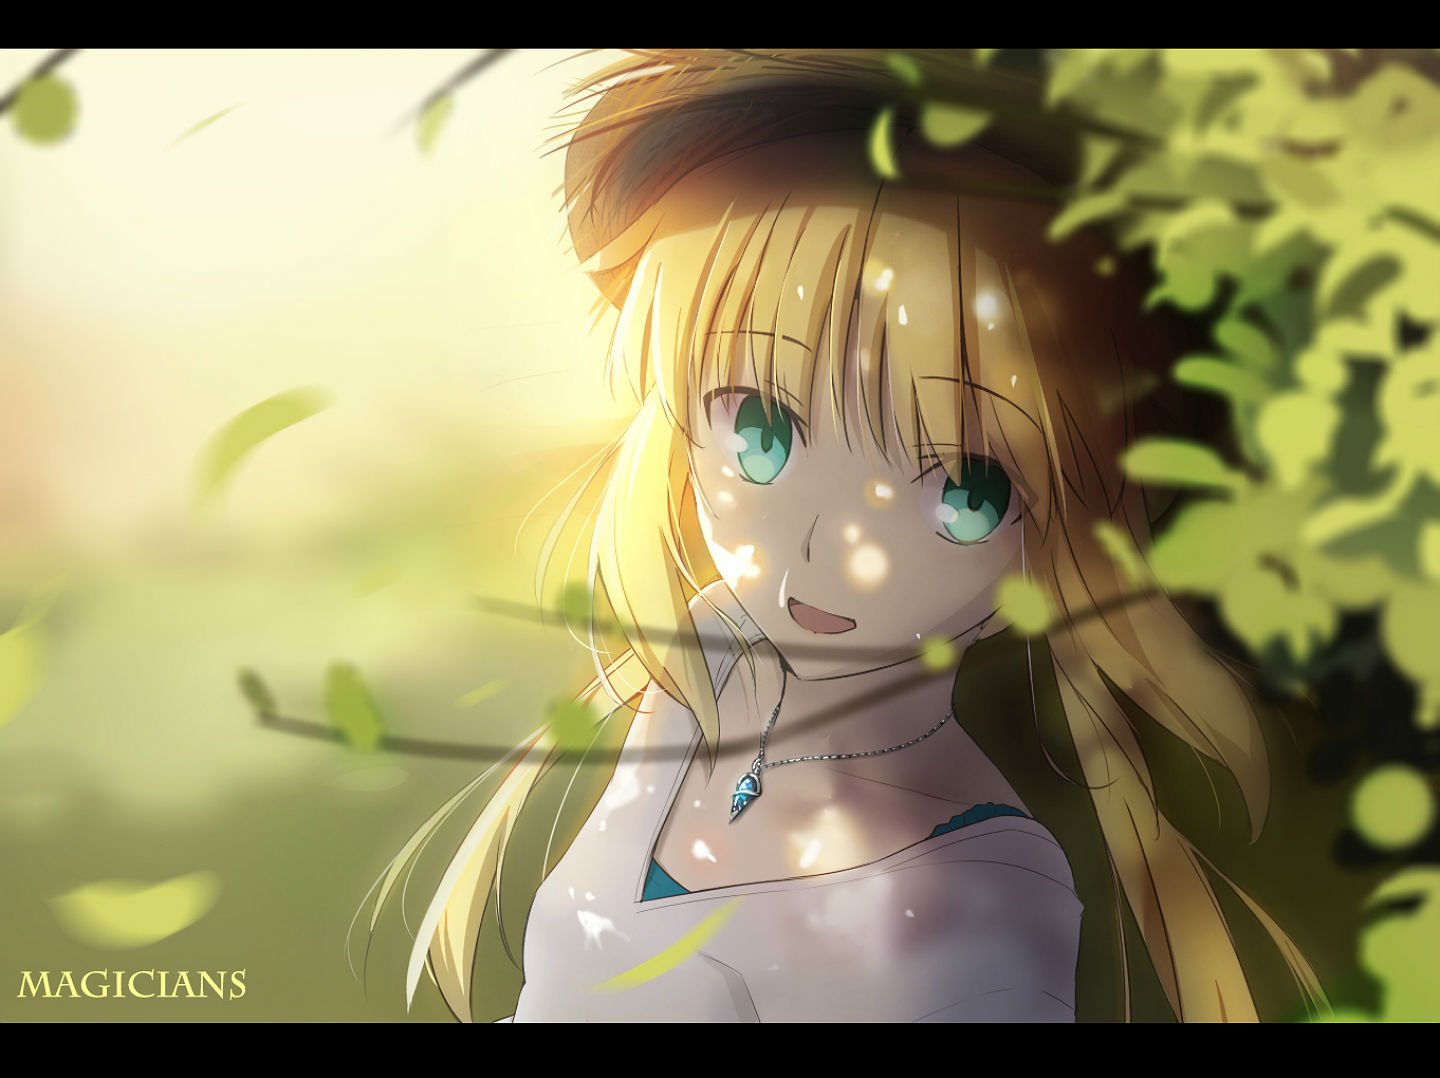 aqua, Eyes, Blonde, Hair, Fate, Stay, Night, Hat, Leaves, Long, Hair, Magicians, Necklace, Saber, Watermark Wallpaper